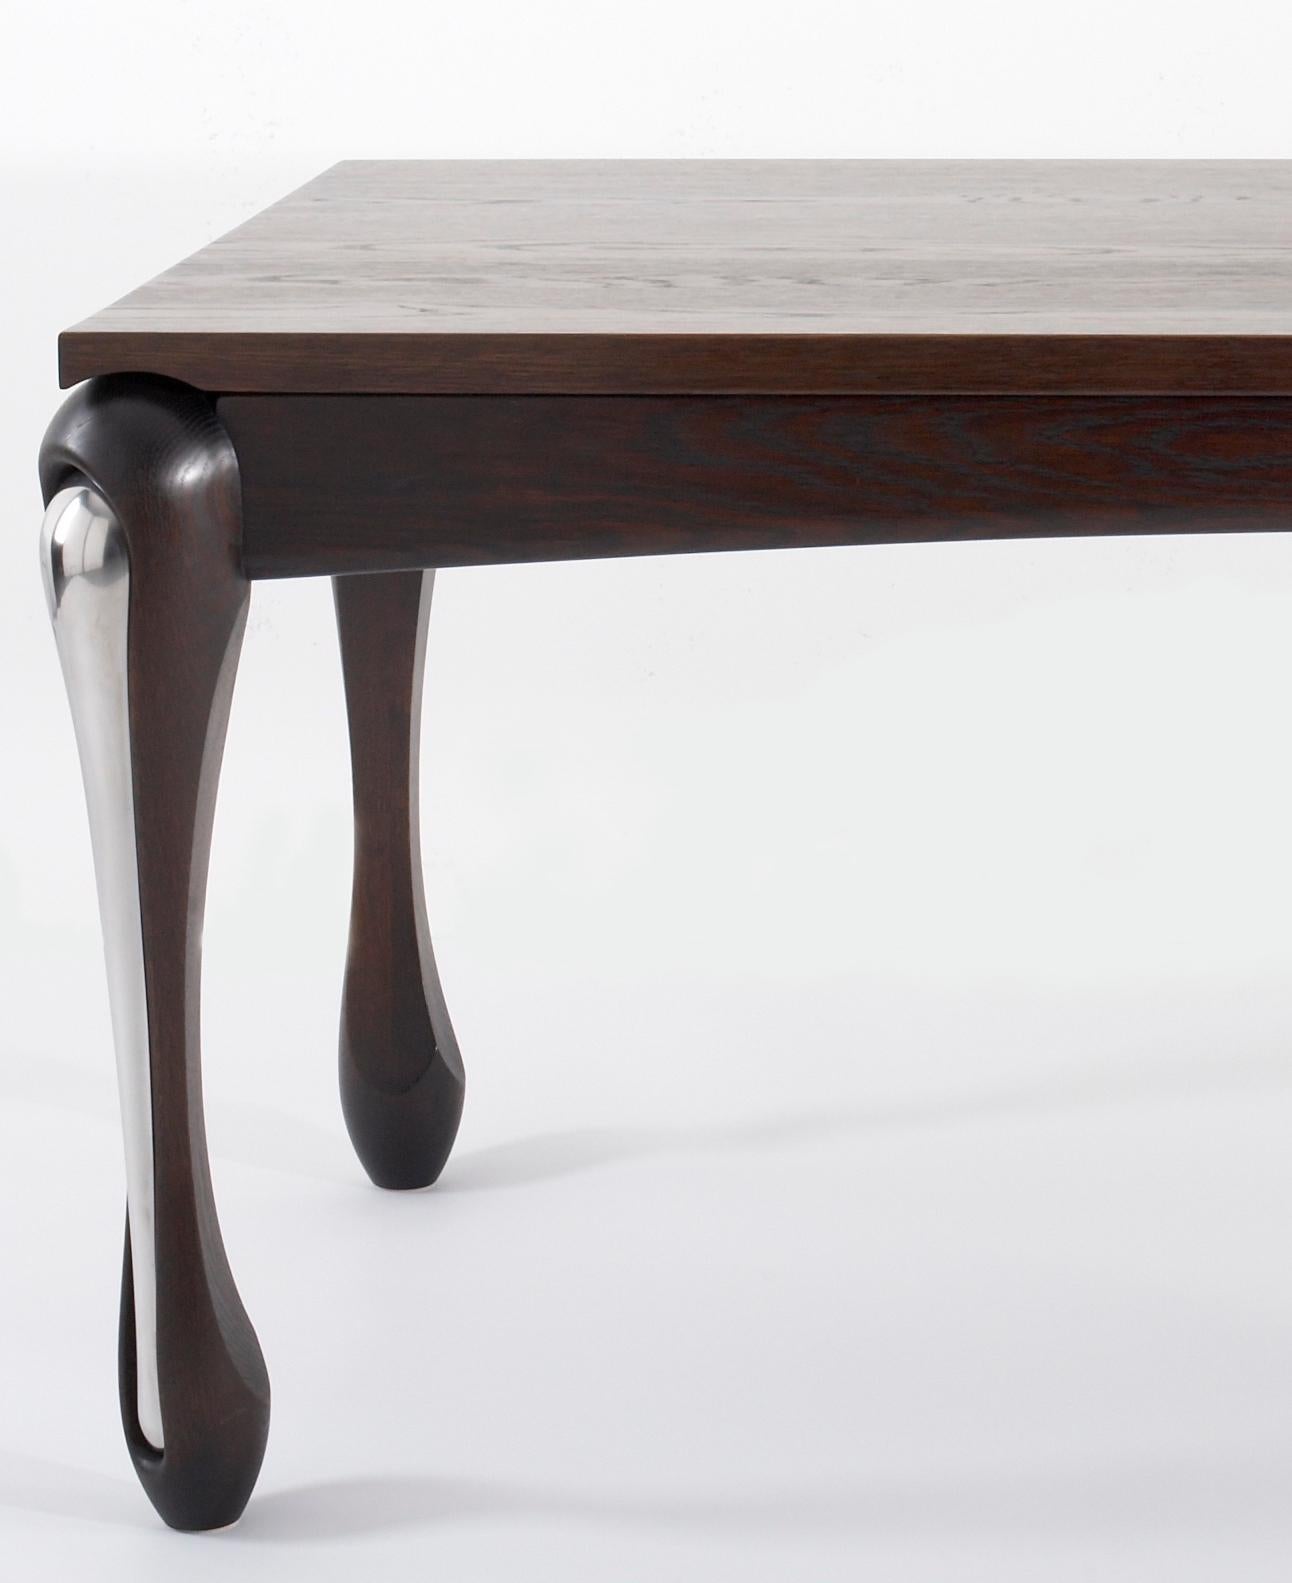 English Contemporary Magus Dining Table in Oak and Stainless Steel - Ex Show Piece Sale For Sale